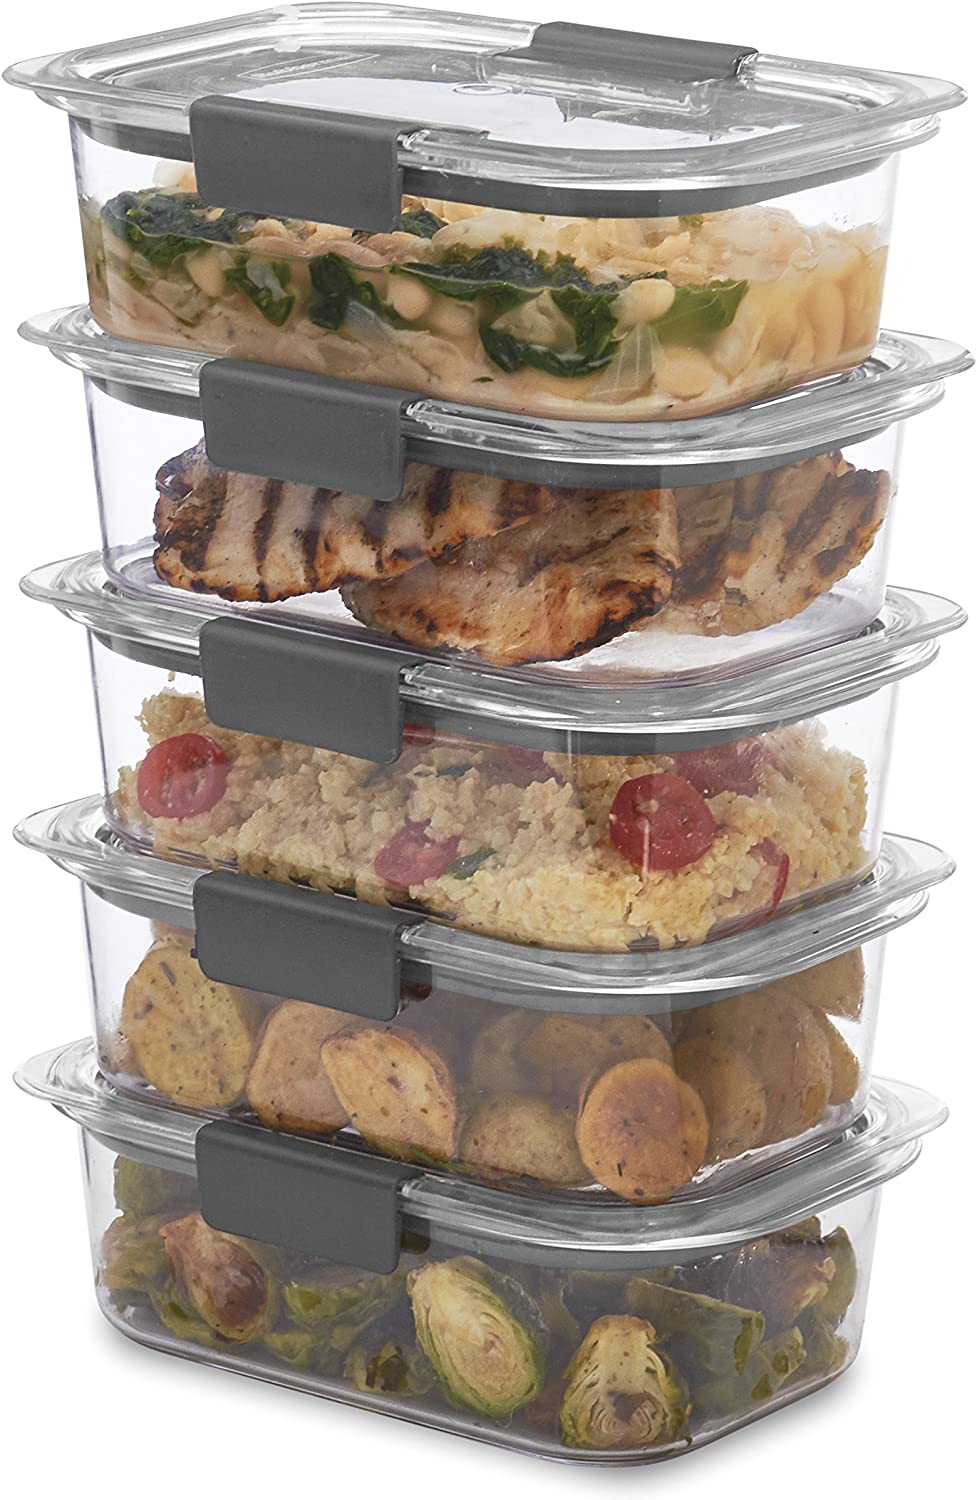 https://discounttoday.net/wp-content/uploads/2022/09/Rubbermaid-10-Piece-Brilliance-Food-Storage-Containers-with-Lids-for-Lunch-Meal-Prep-and-Leftovers-Dishwasher-Safe-3.2-Cup-Clear-Grey2.jpg